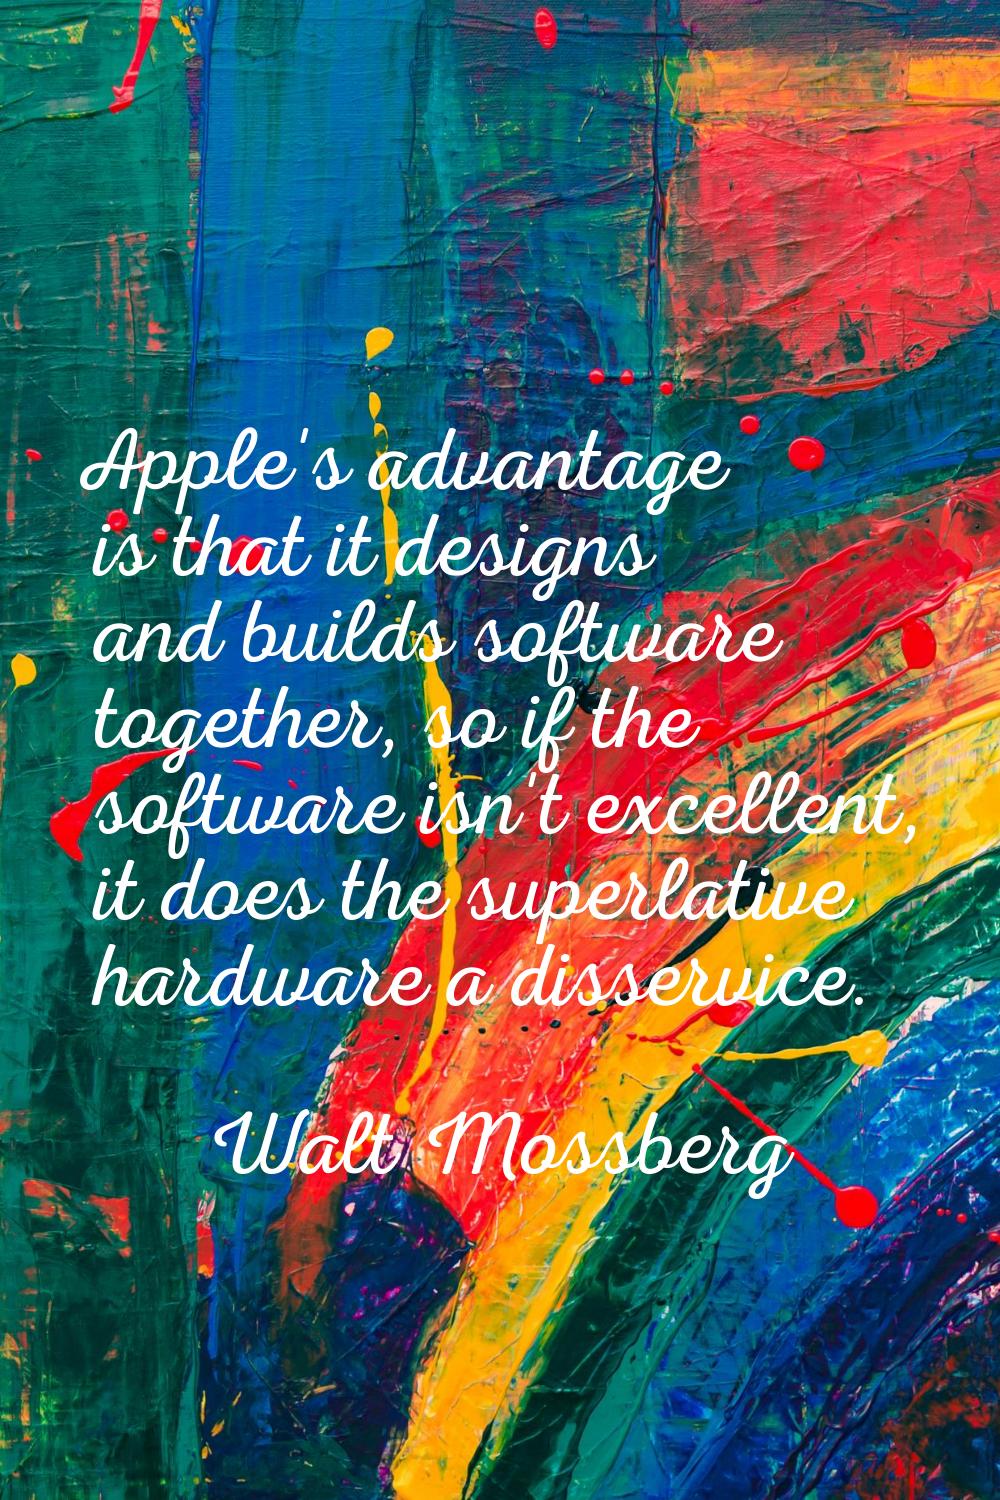 Apple's advantage is that it designs and builds software together, so if the software isn't excelle